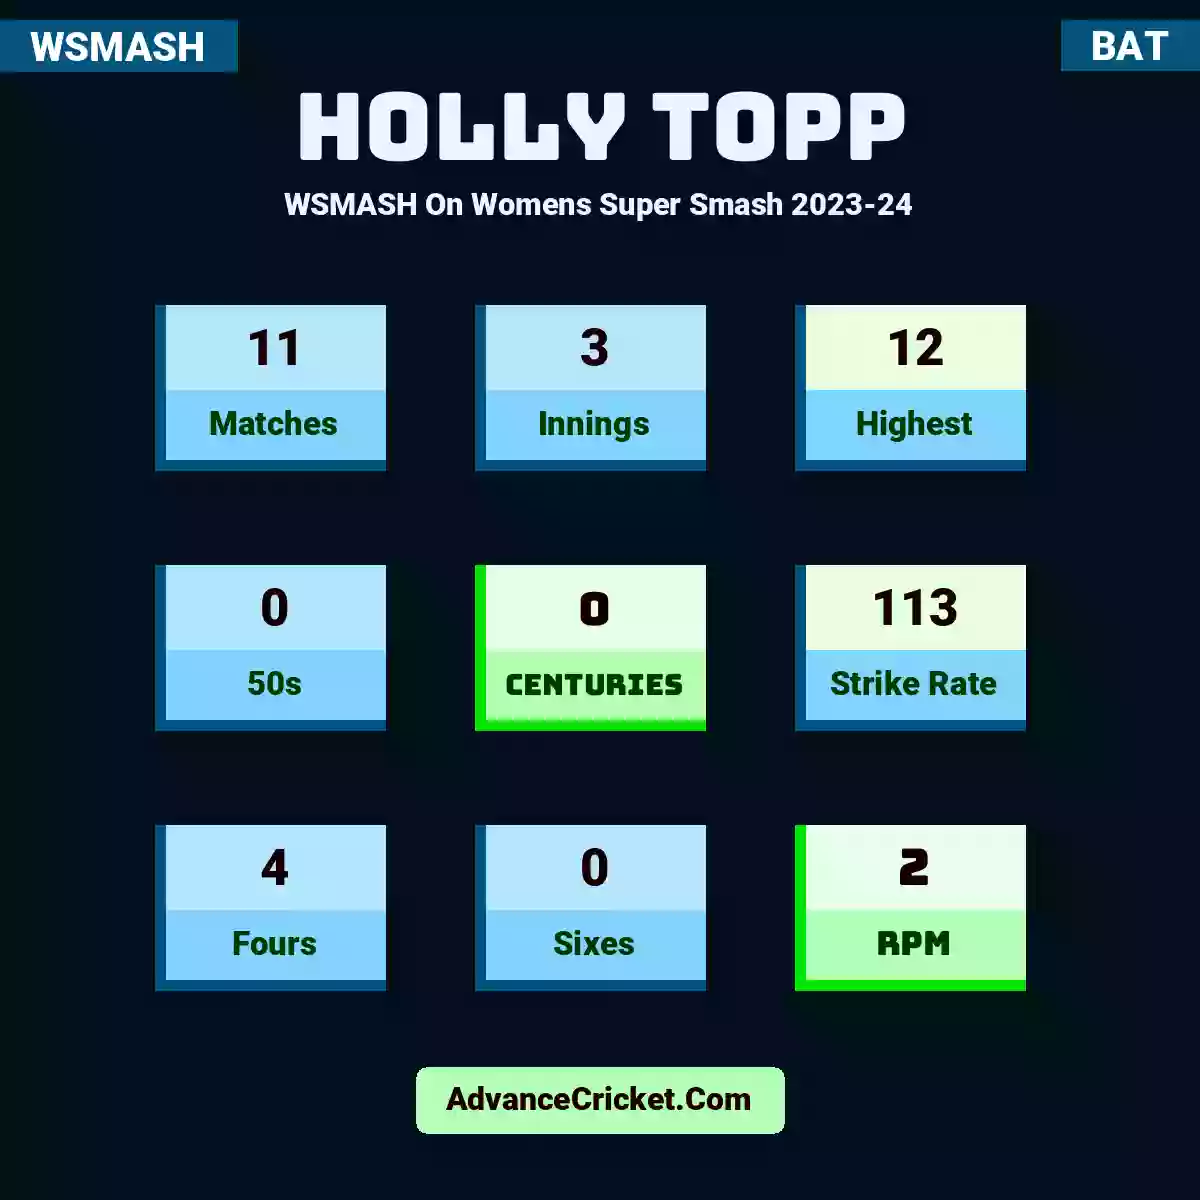 Holly Topp WSMASH  On Womens Super Smash 2023-24, Holly Topp played 11 matches, scored 12 runs as highest, 0 half-centuries, and 0 centuries, with a strike rate of 113. H.Topp hit 4 fours and 0 sixes, with an RPM of 2.